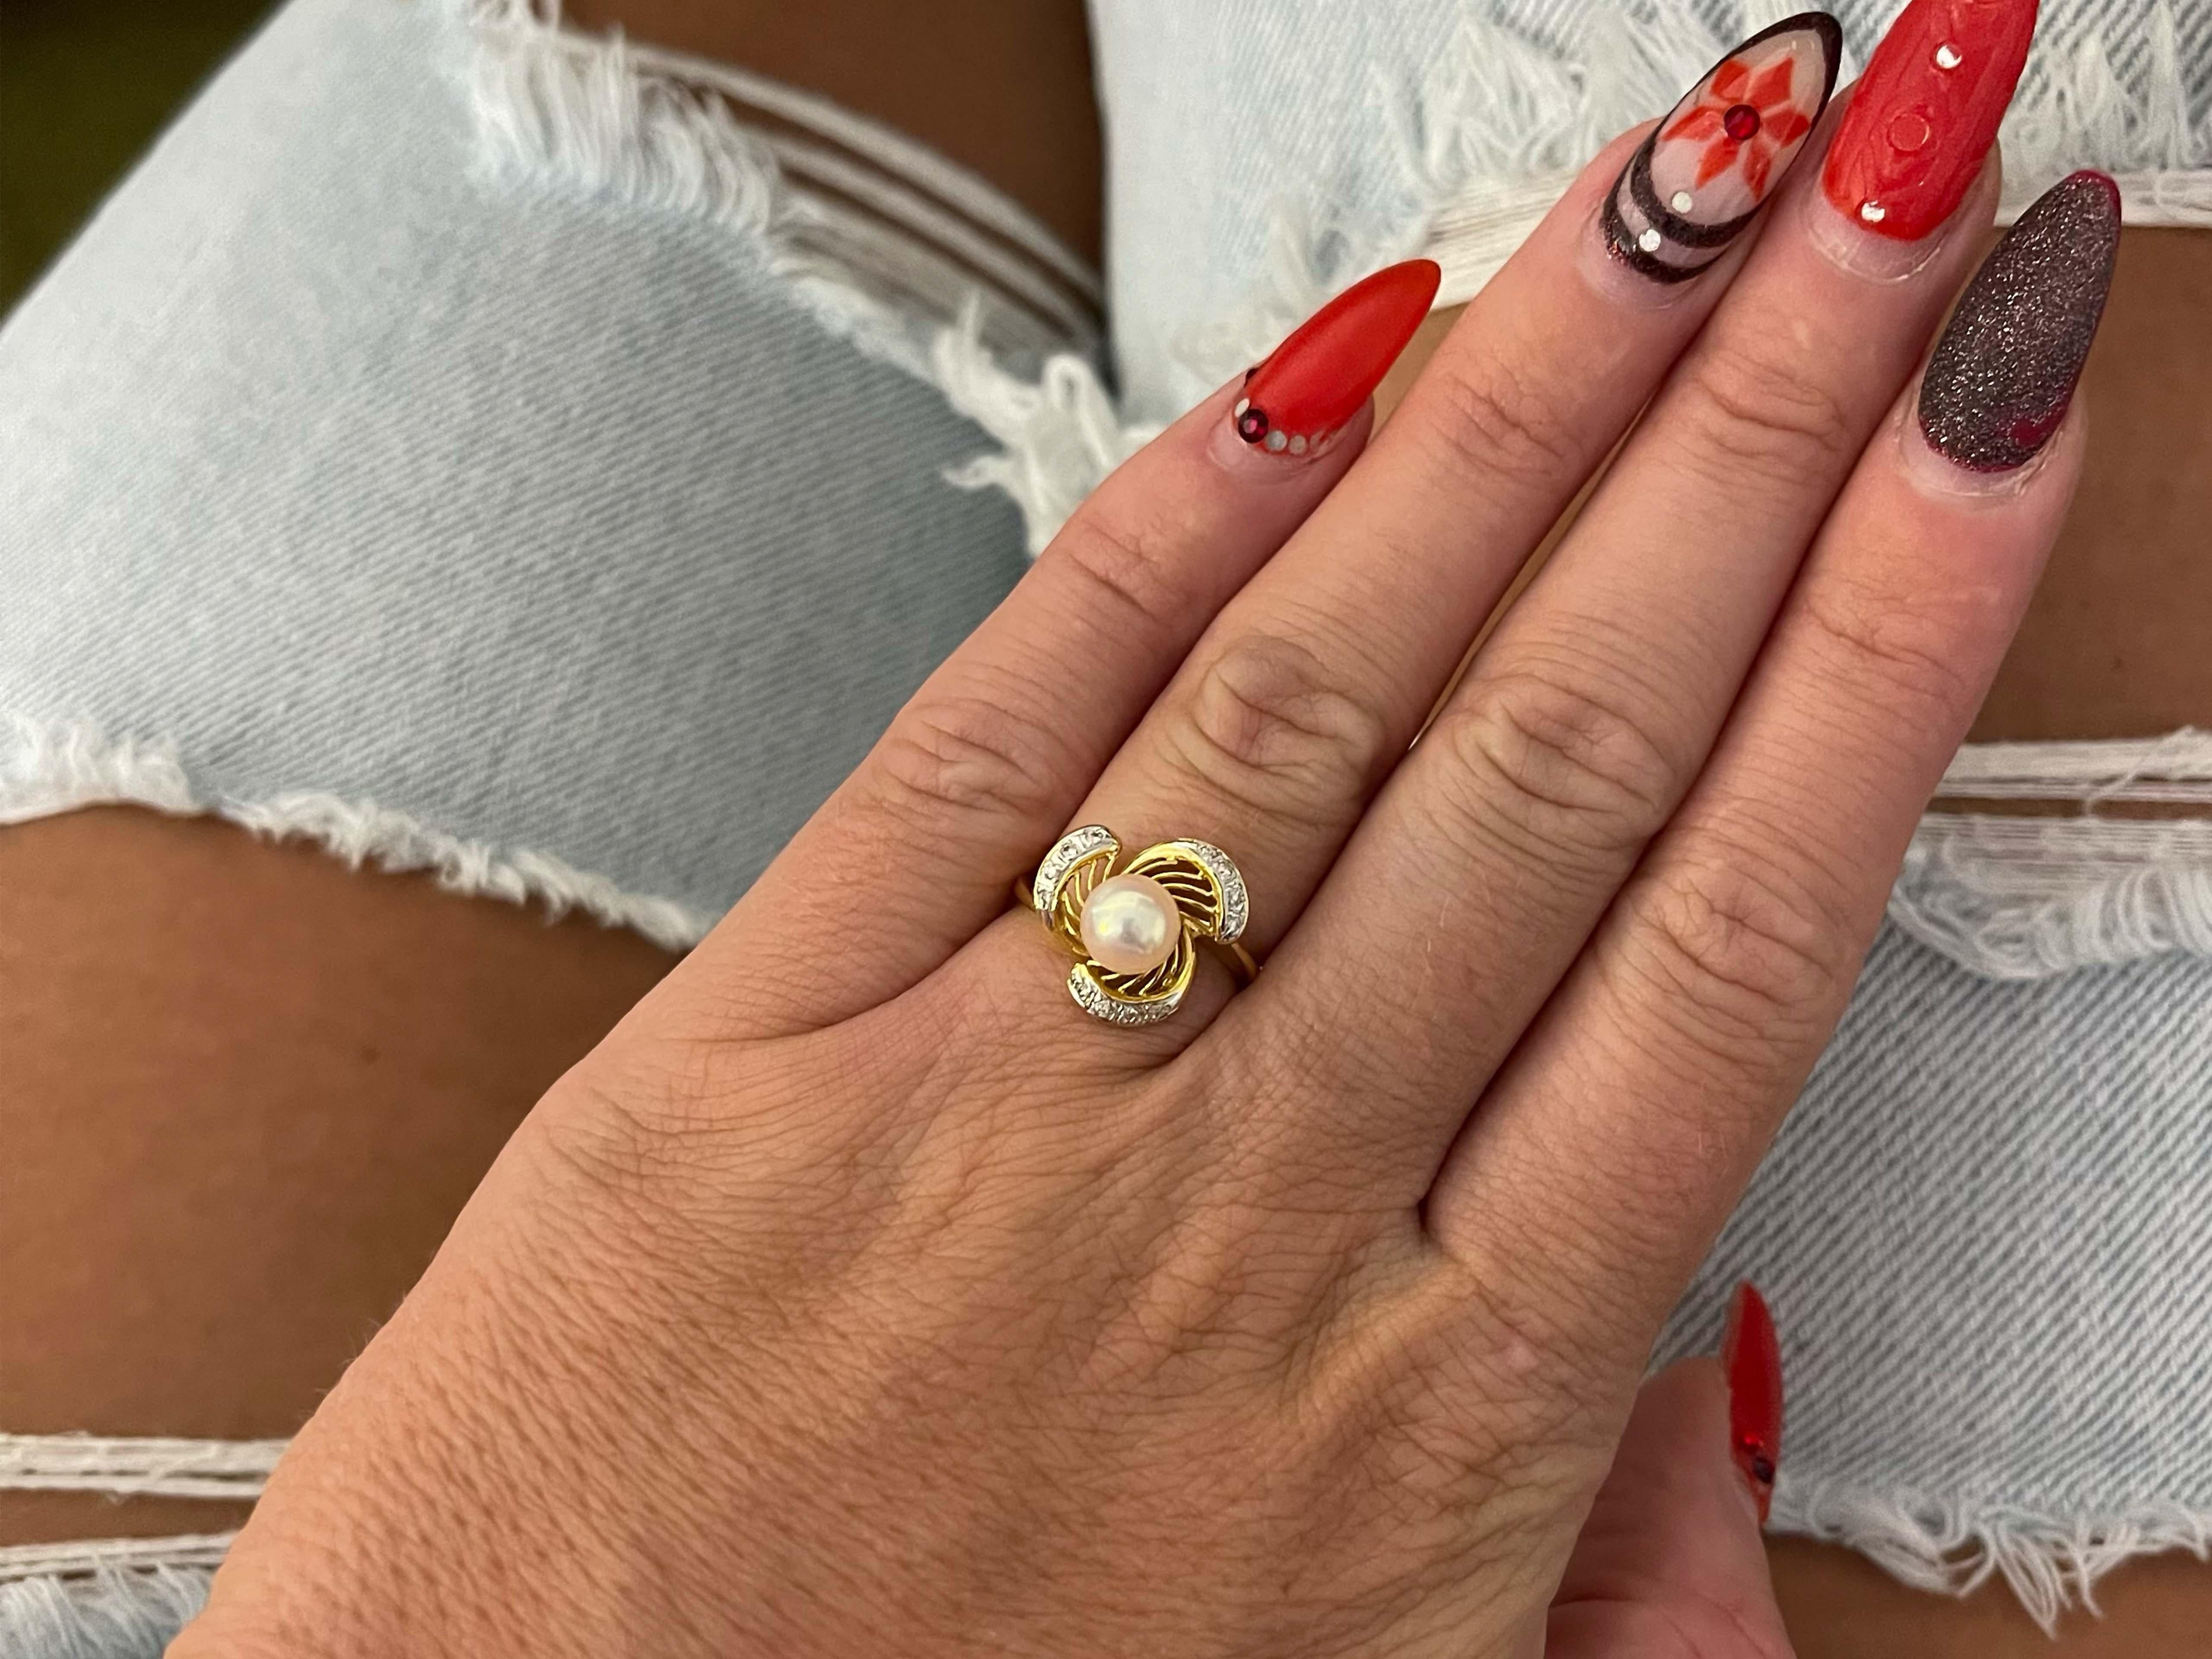 Item Specifications:

Metal: 18K Yellow Gold

Style: Statement Ring

Ring Size: 5.75 (resizing available for a fee)

Total Weight: 3.7 Grams

Ring Height: 14 mm

Pearl Specifications:

Shape: Sphere

Diameter: 6.6 mm

Diamond Count: 12 round